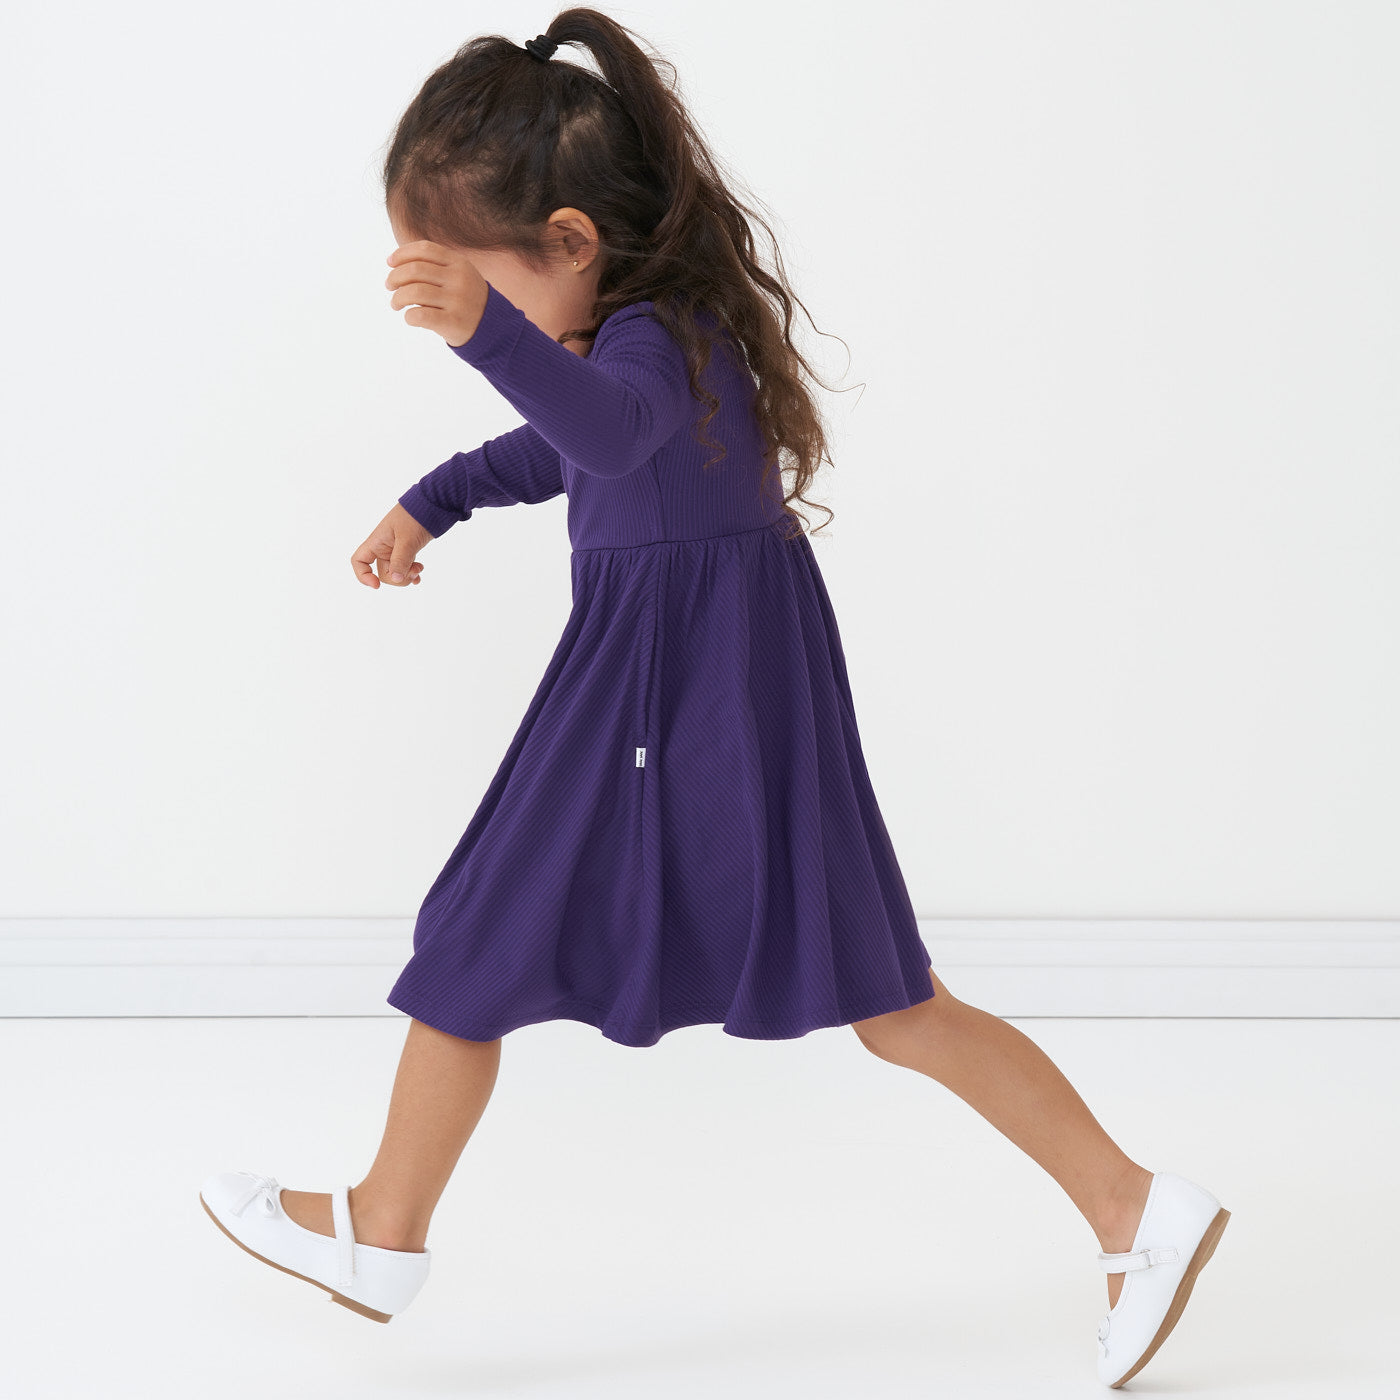 Side view image of a child running wearing a Deep Amethyst ribbed twirl dress